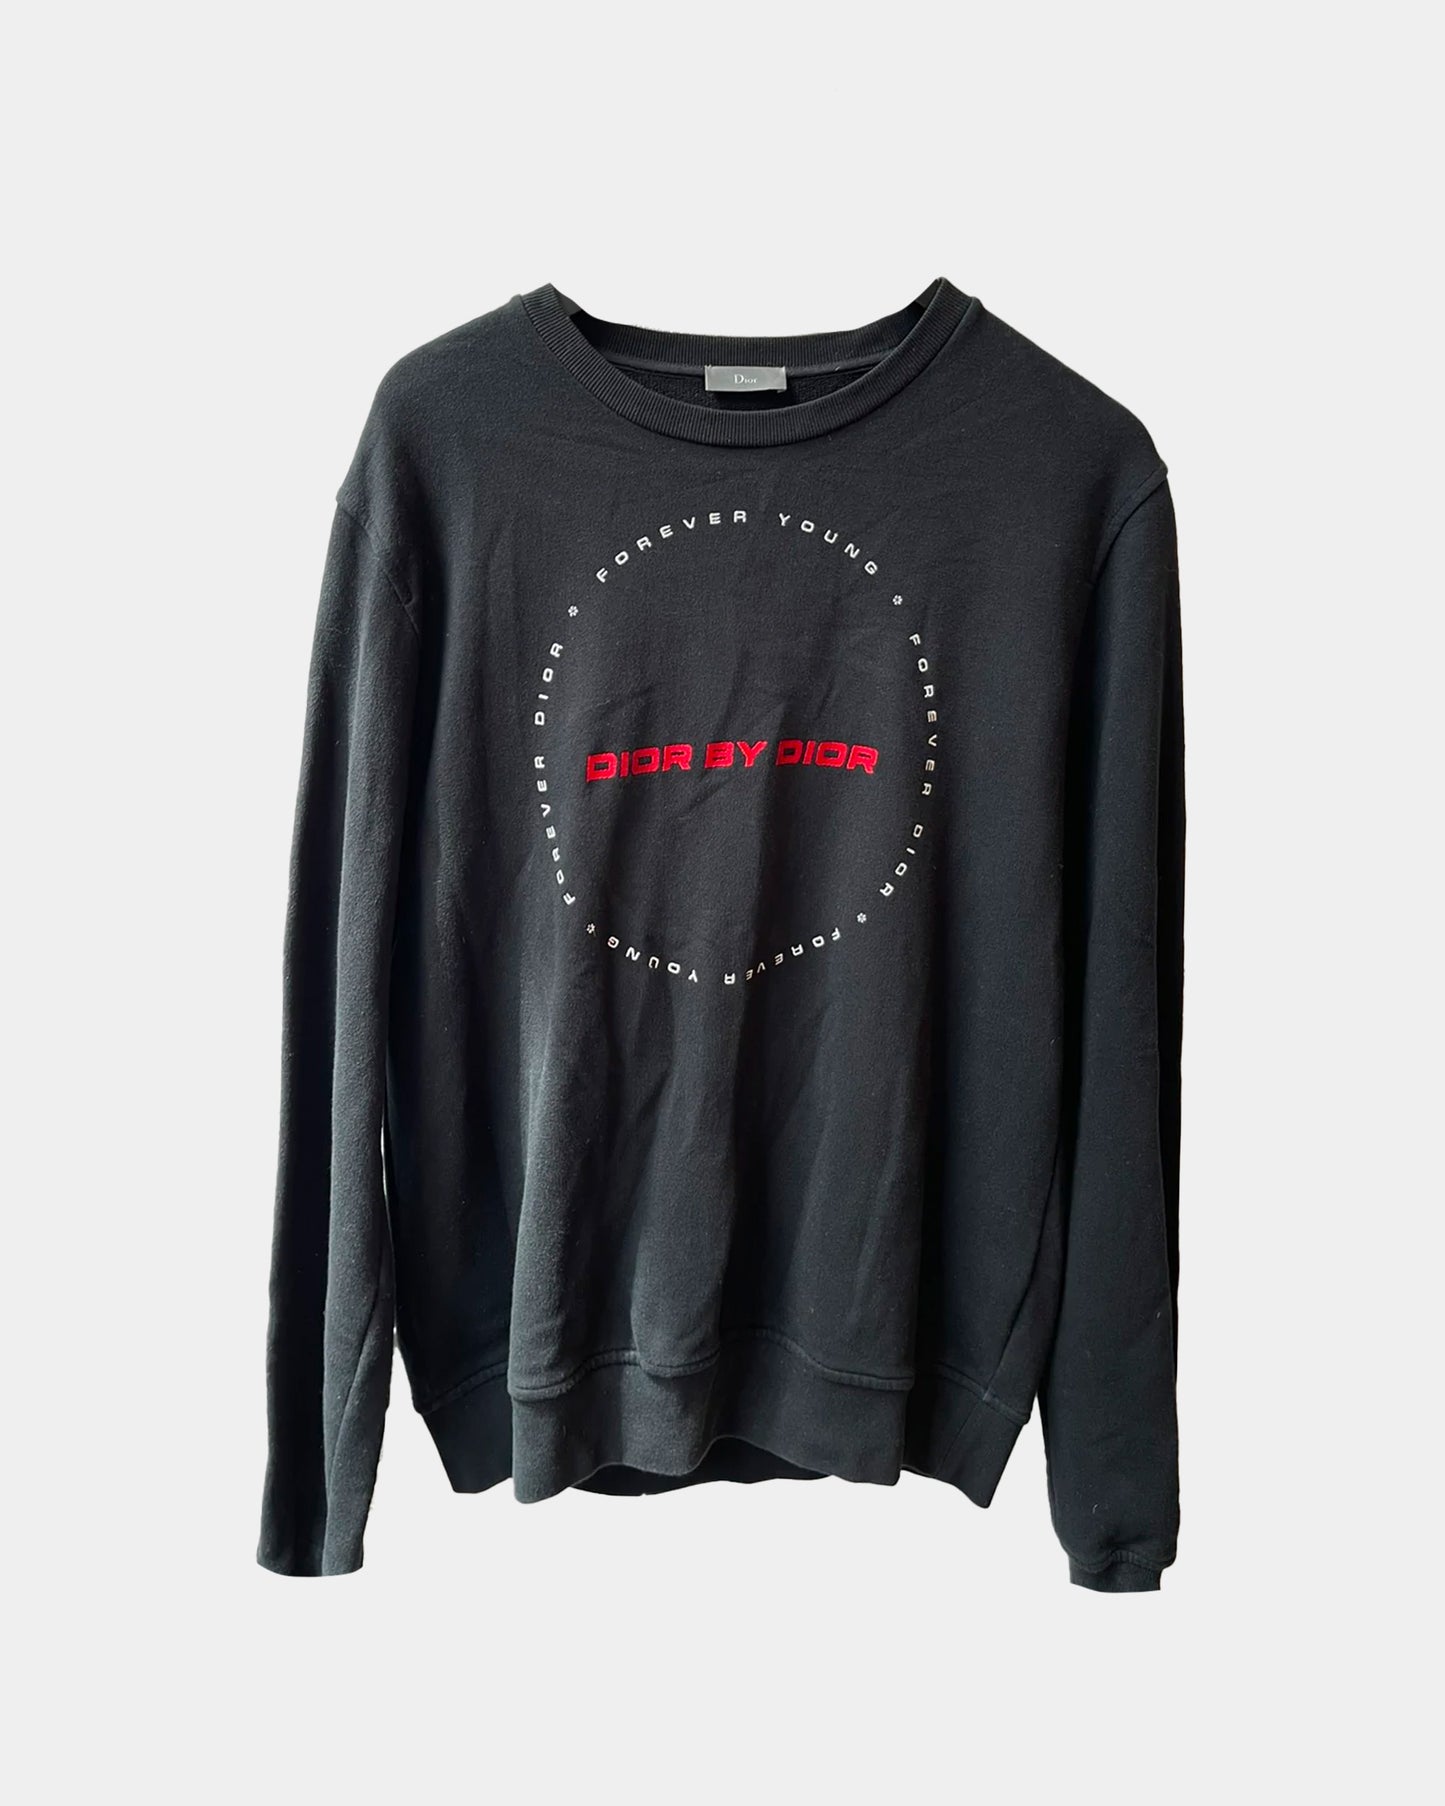 Dior Homme Forever Young Sweater Black XL